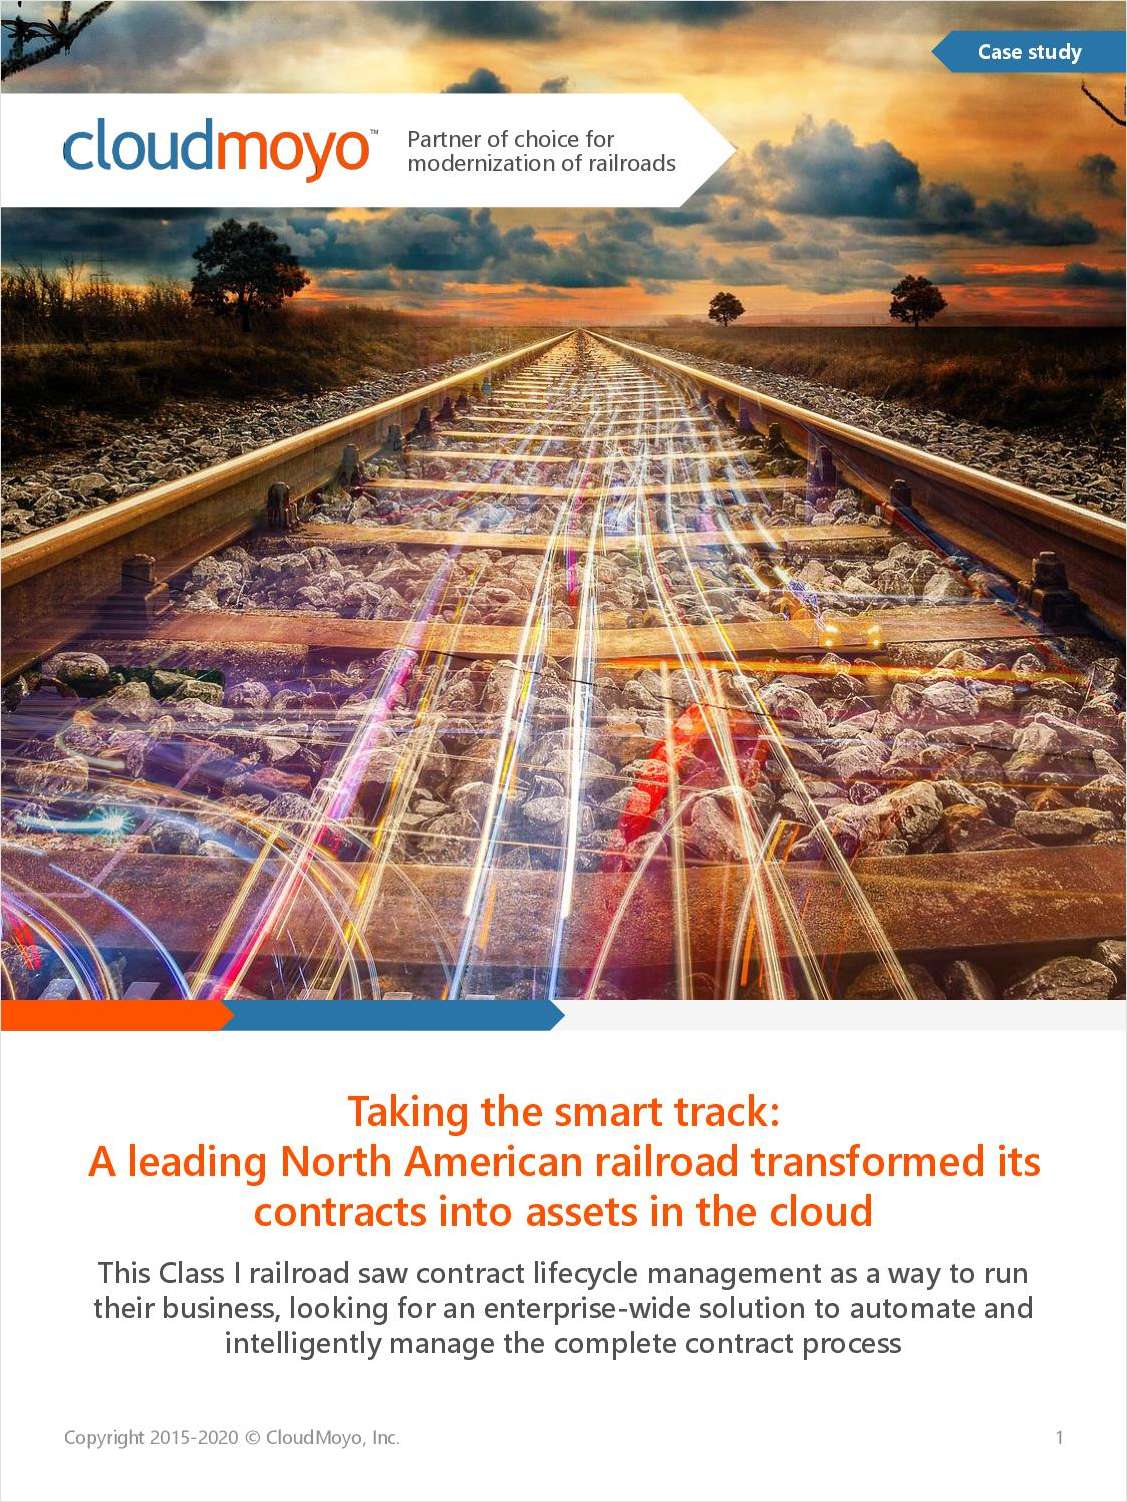 Taking the Smart Track: A Leading North American Railroad Transformed Its Contracts Into Assets in the Cloud